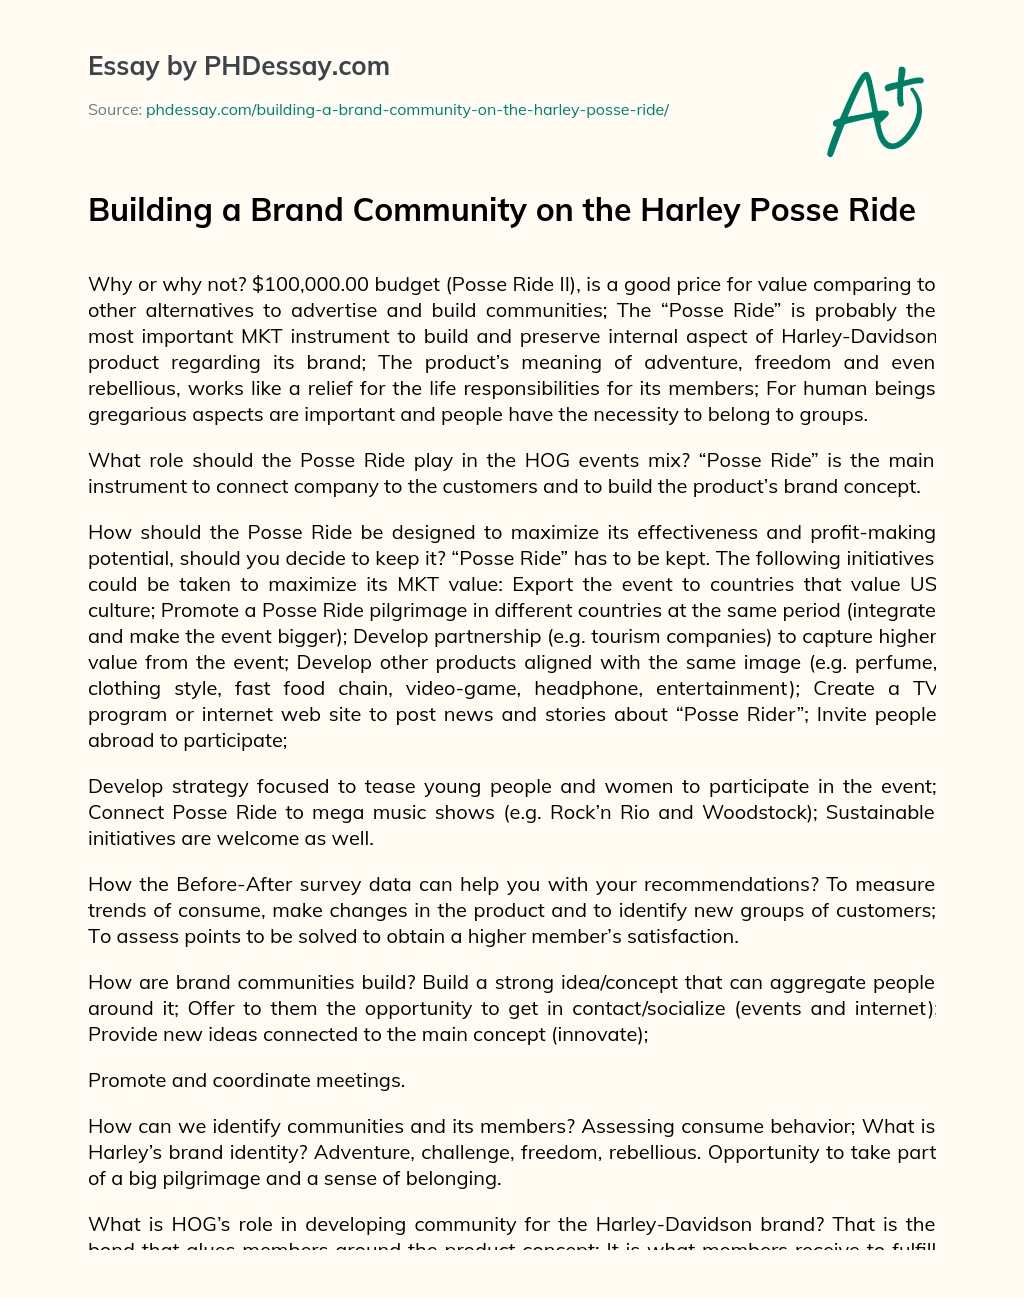 Building a Brand Community on the Harley Posse Ride essay